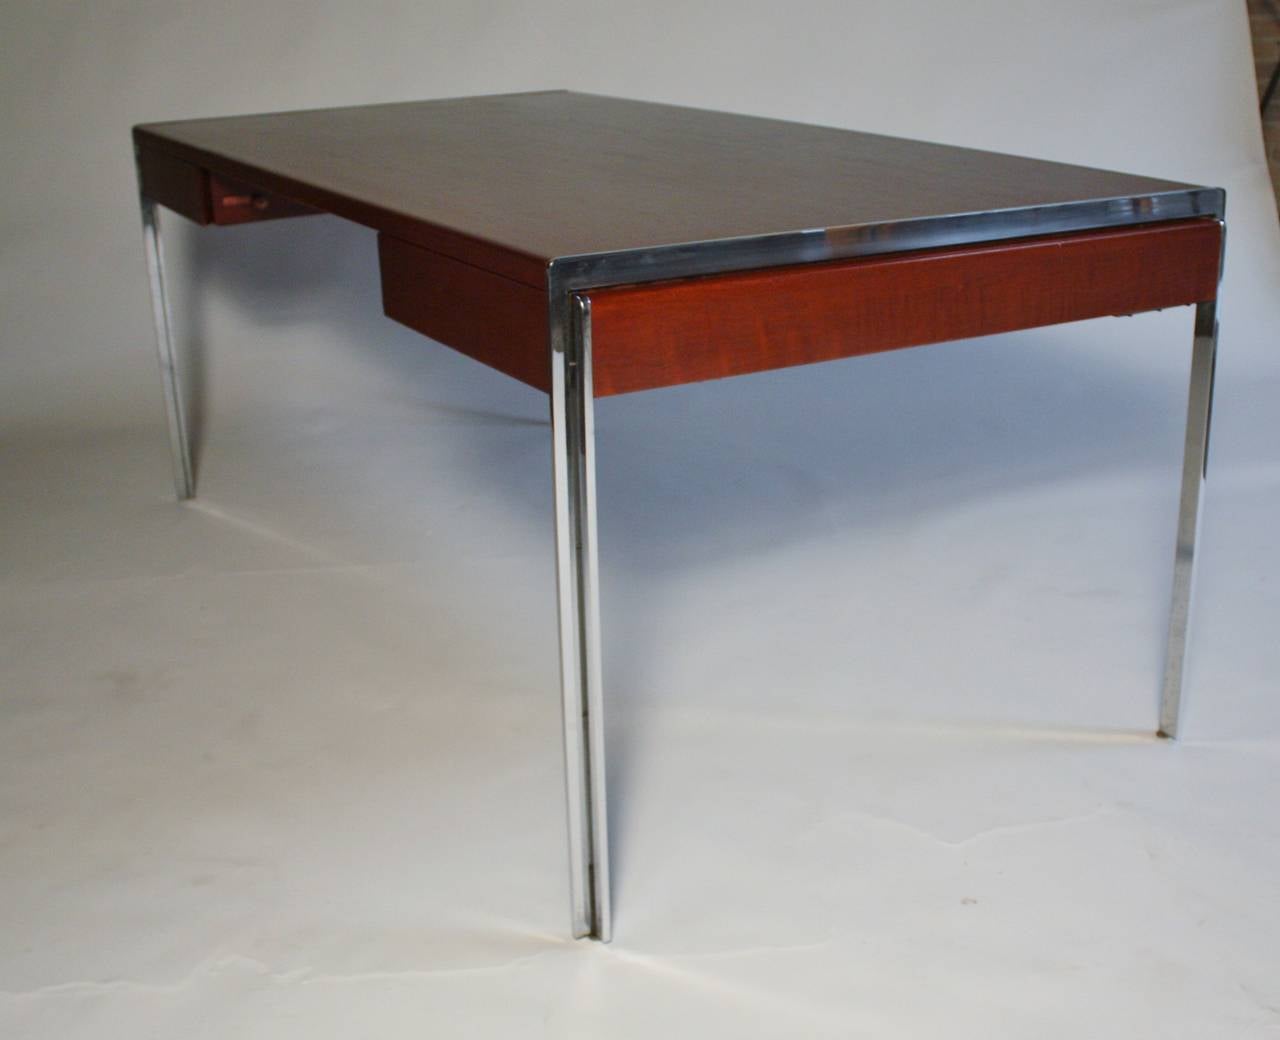 Mid Century modern wood and chrome frame Executive desk by Stow Davis with two pull-out pencil drawers. Drawers lock on its side - no keys. Wood and chrome is clean with minimal wear for it's age.